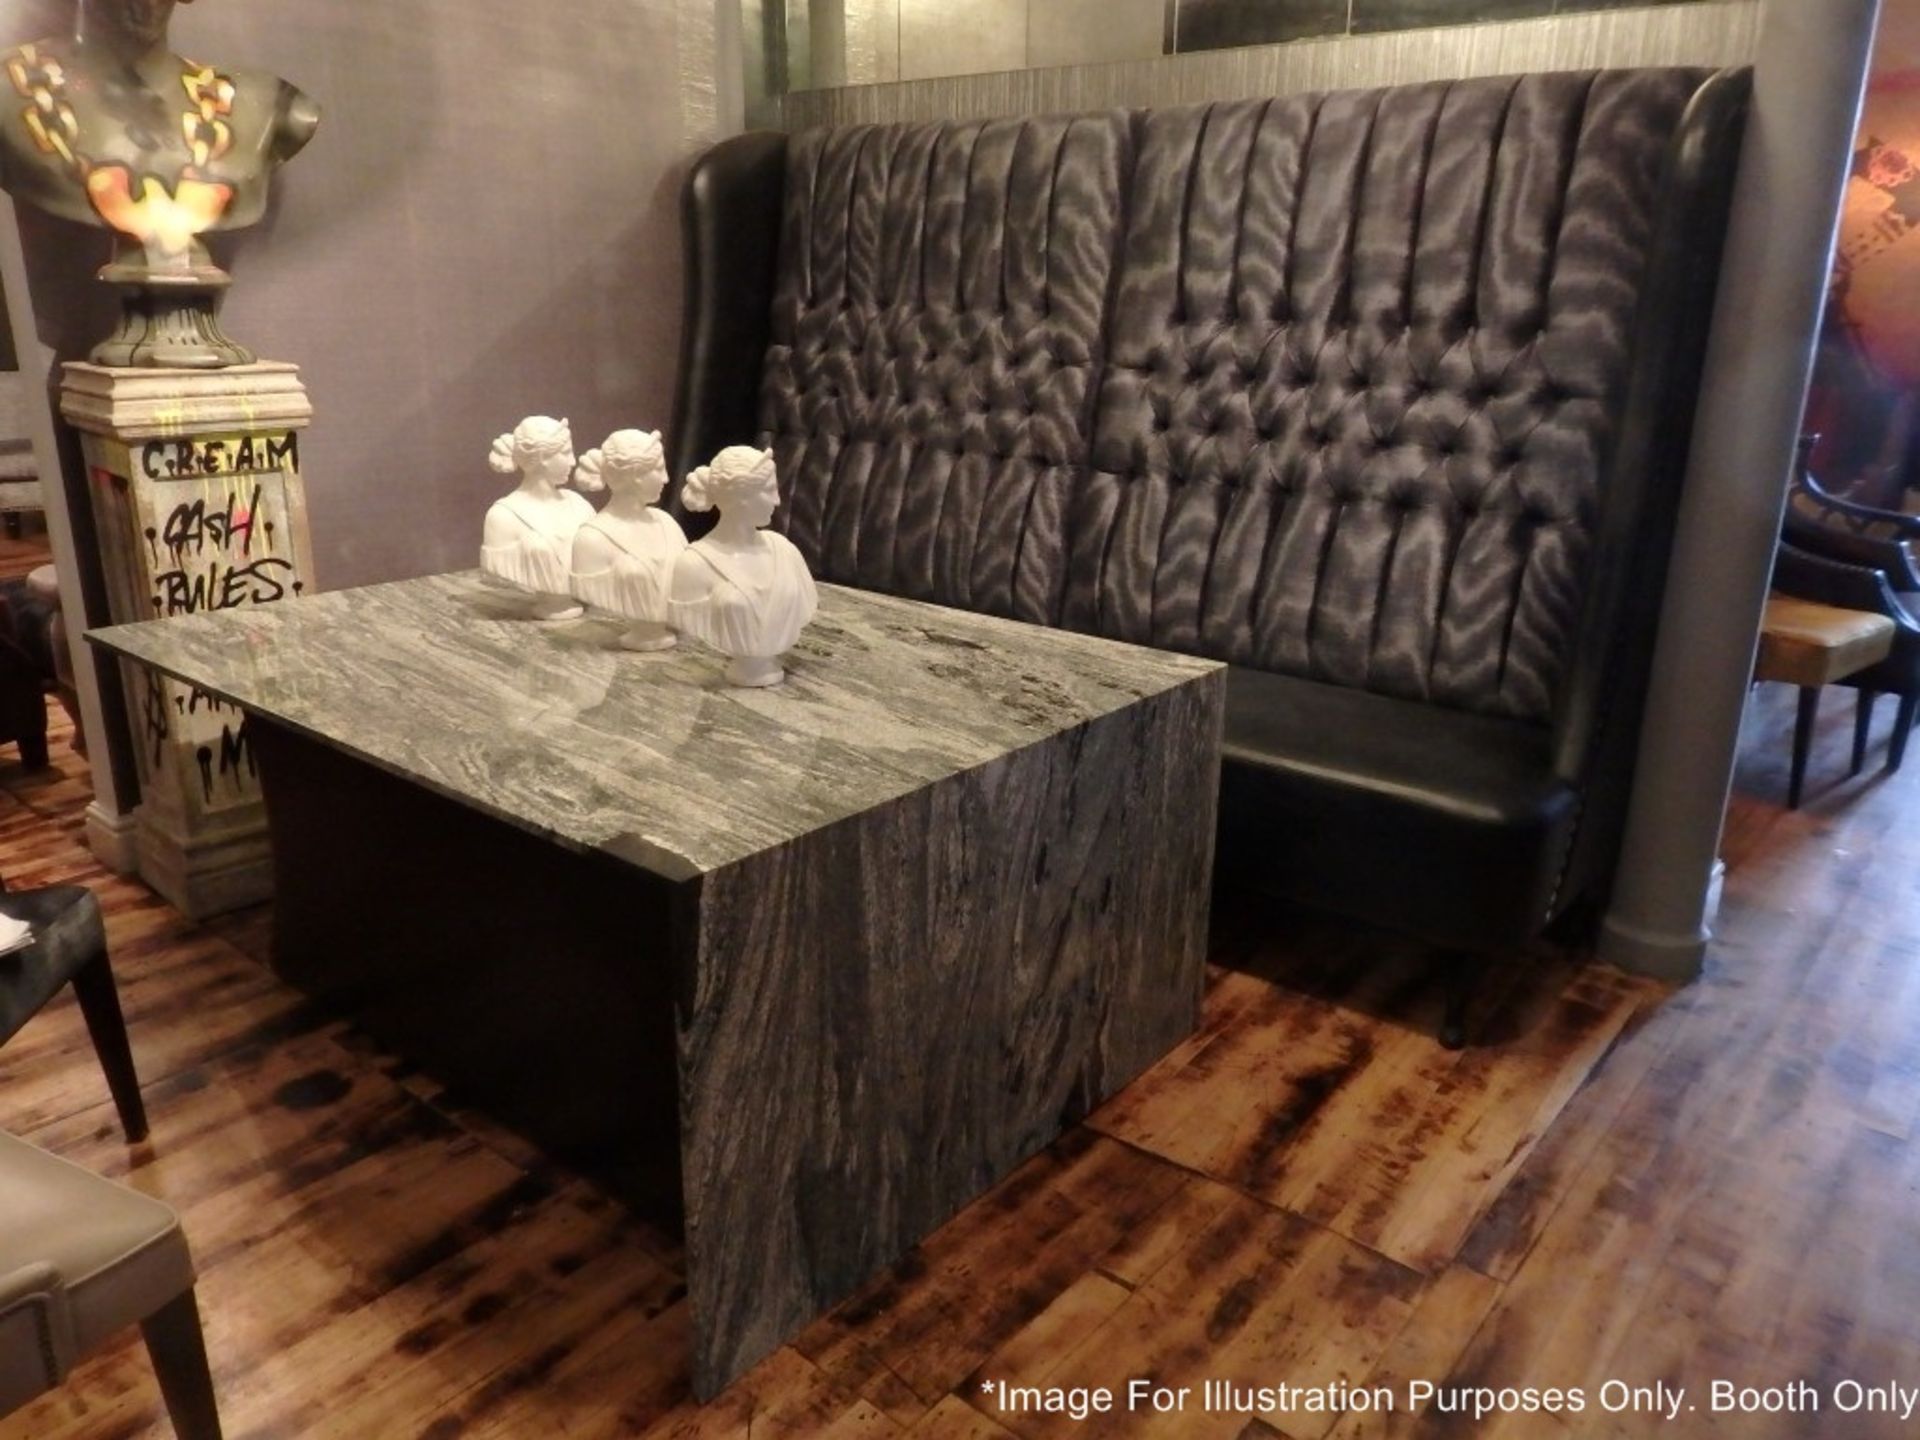 1 x Handcrafted Booth - Upholstered In A Rich "Zinc Jacopo" Fabric - Huge In Size, 2.8 Metres Wide - - Image 5 of 5